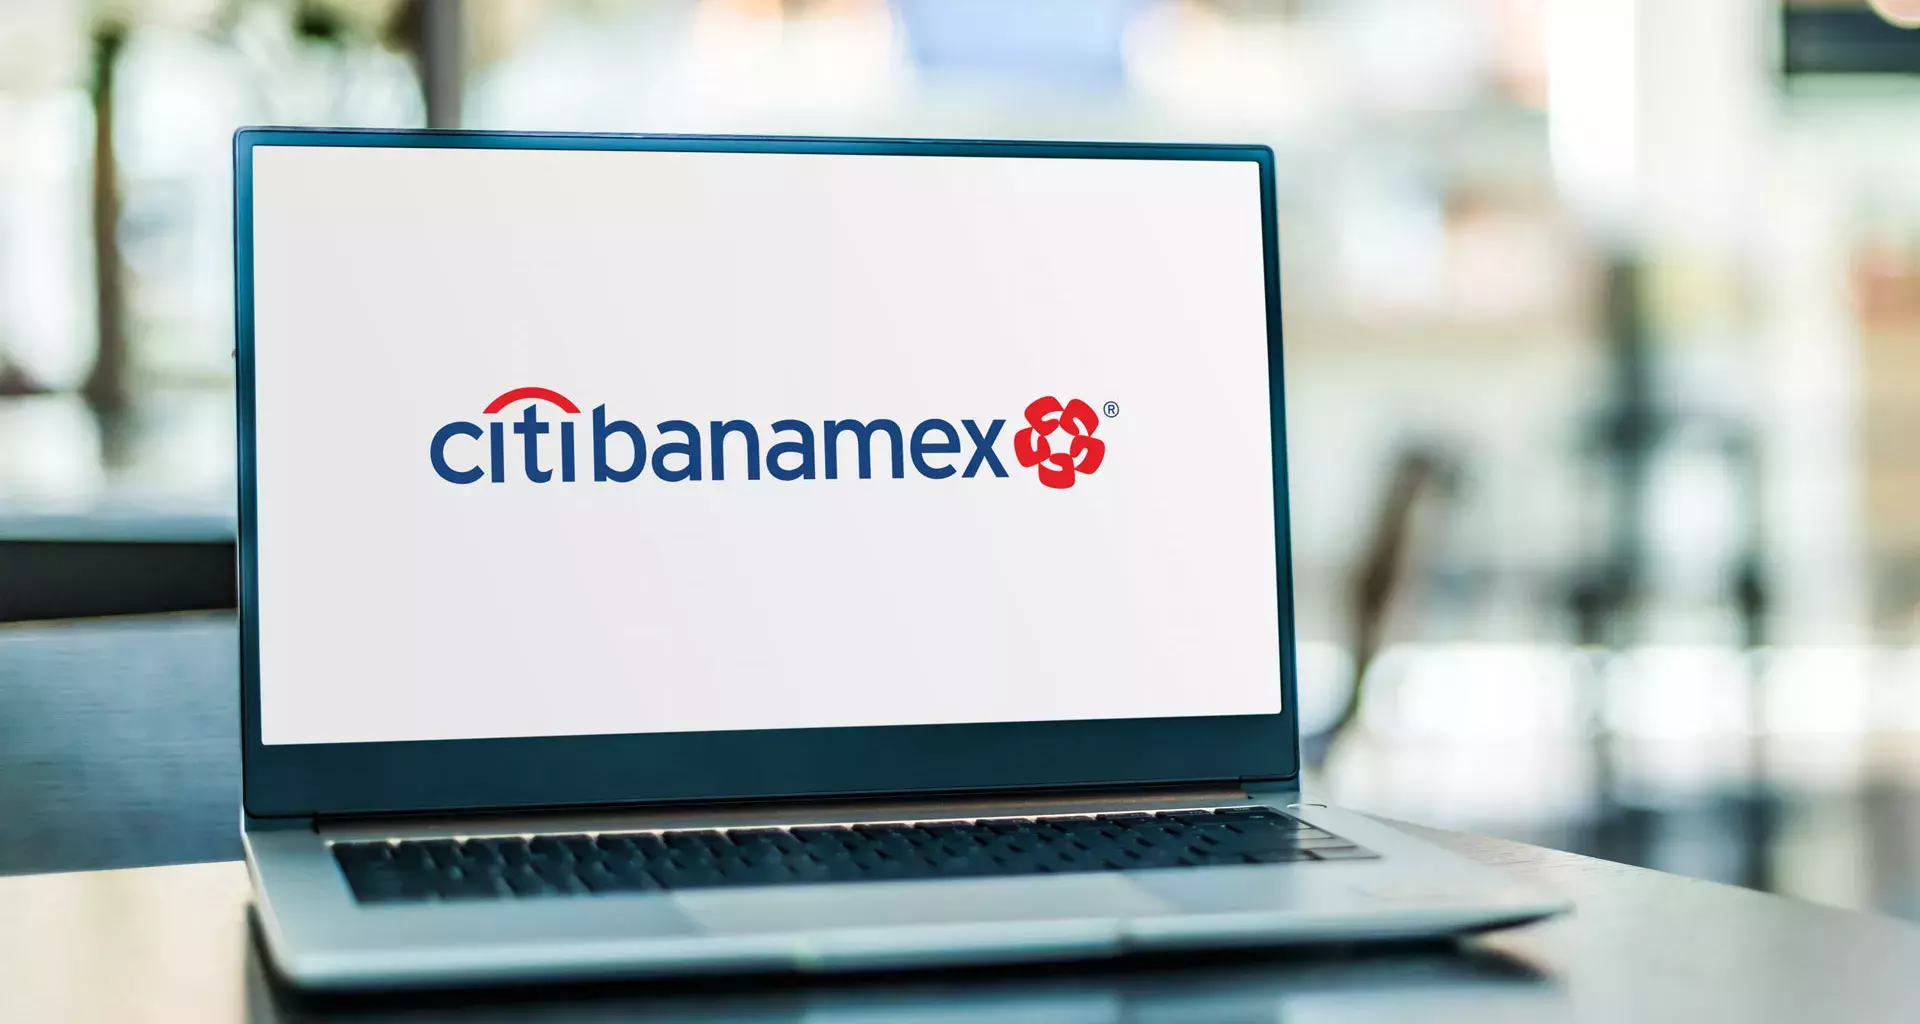 5 key points for understanding Citigroup’s sale of Banamex